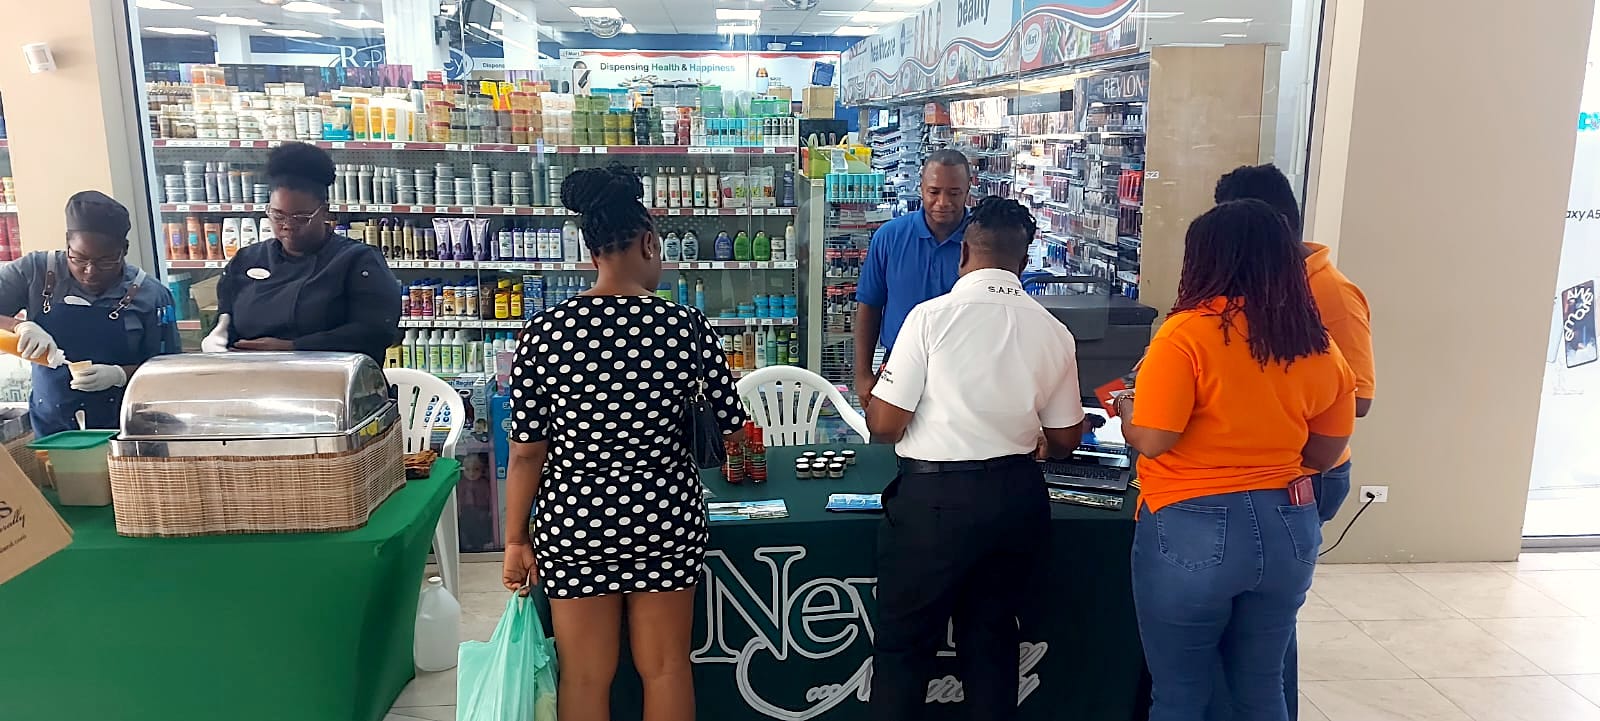 Mr. Alexis Arthurton, Caribbean Sales Manager at the Nevis Tourism Authority interacting with members of the public at the Sheraton Mall in Barbados on May 12, 2023